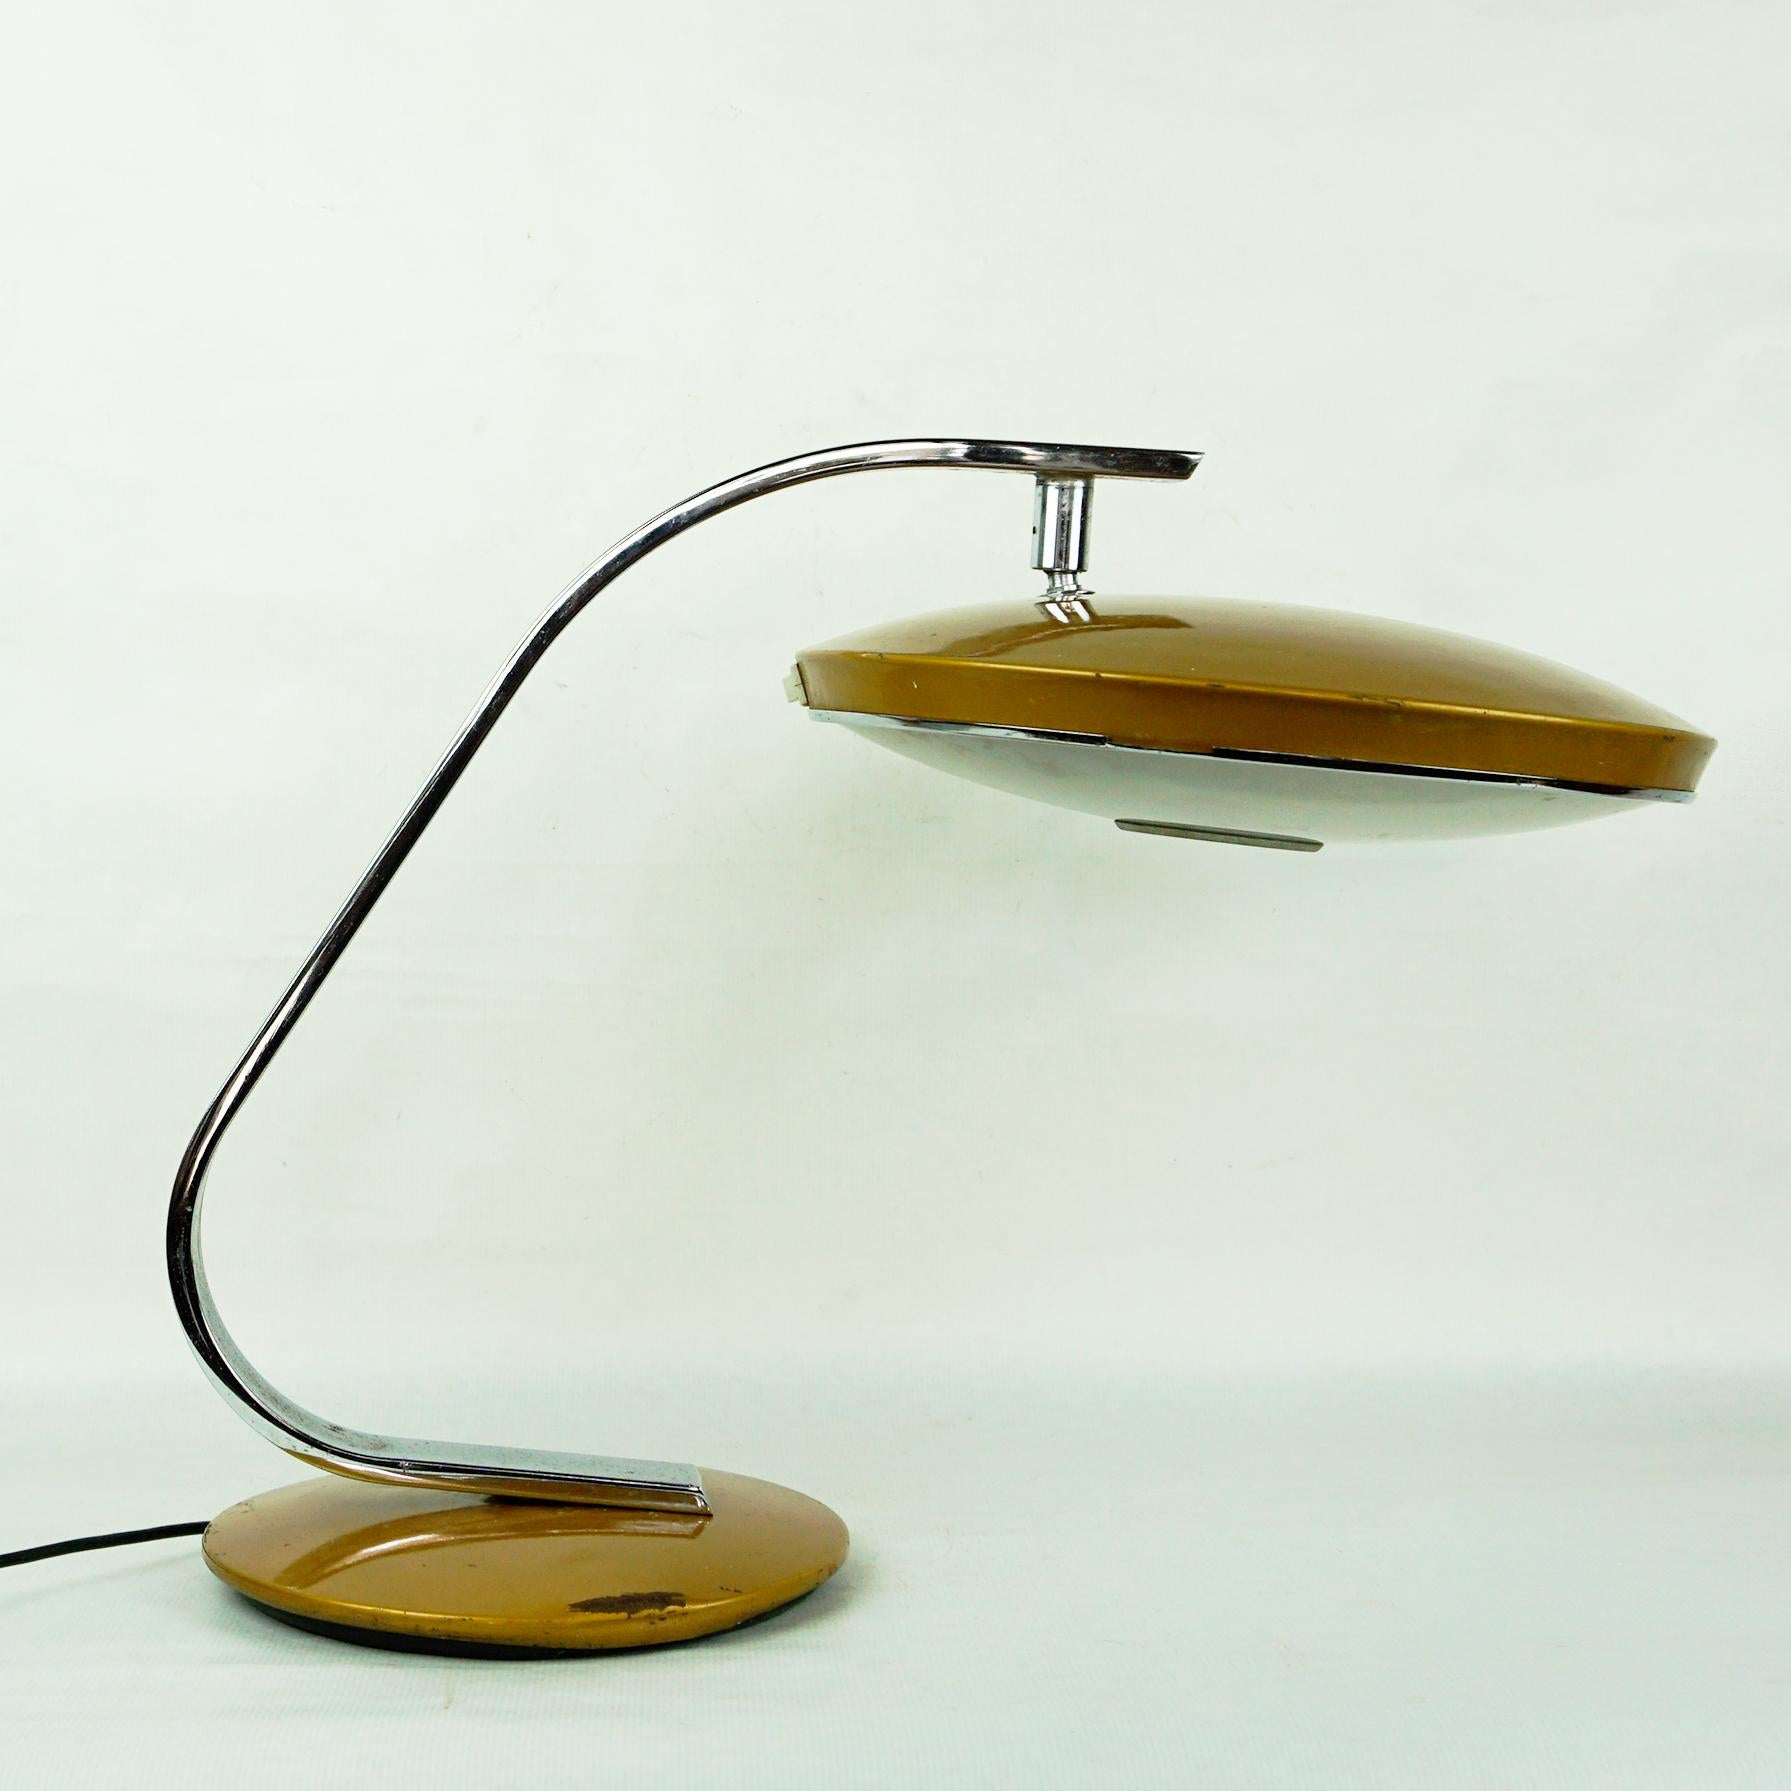 Rotating light golden brown enamelled Metal Desk lamp from the Spanish lighting manufacturer Fase Madrid designed  in the 1960s.
It featres an adjustable disc shaped shade with frosted glass diffuser, ball joint, with 2 sockets for E27 bulb size and